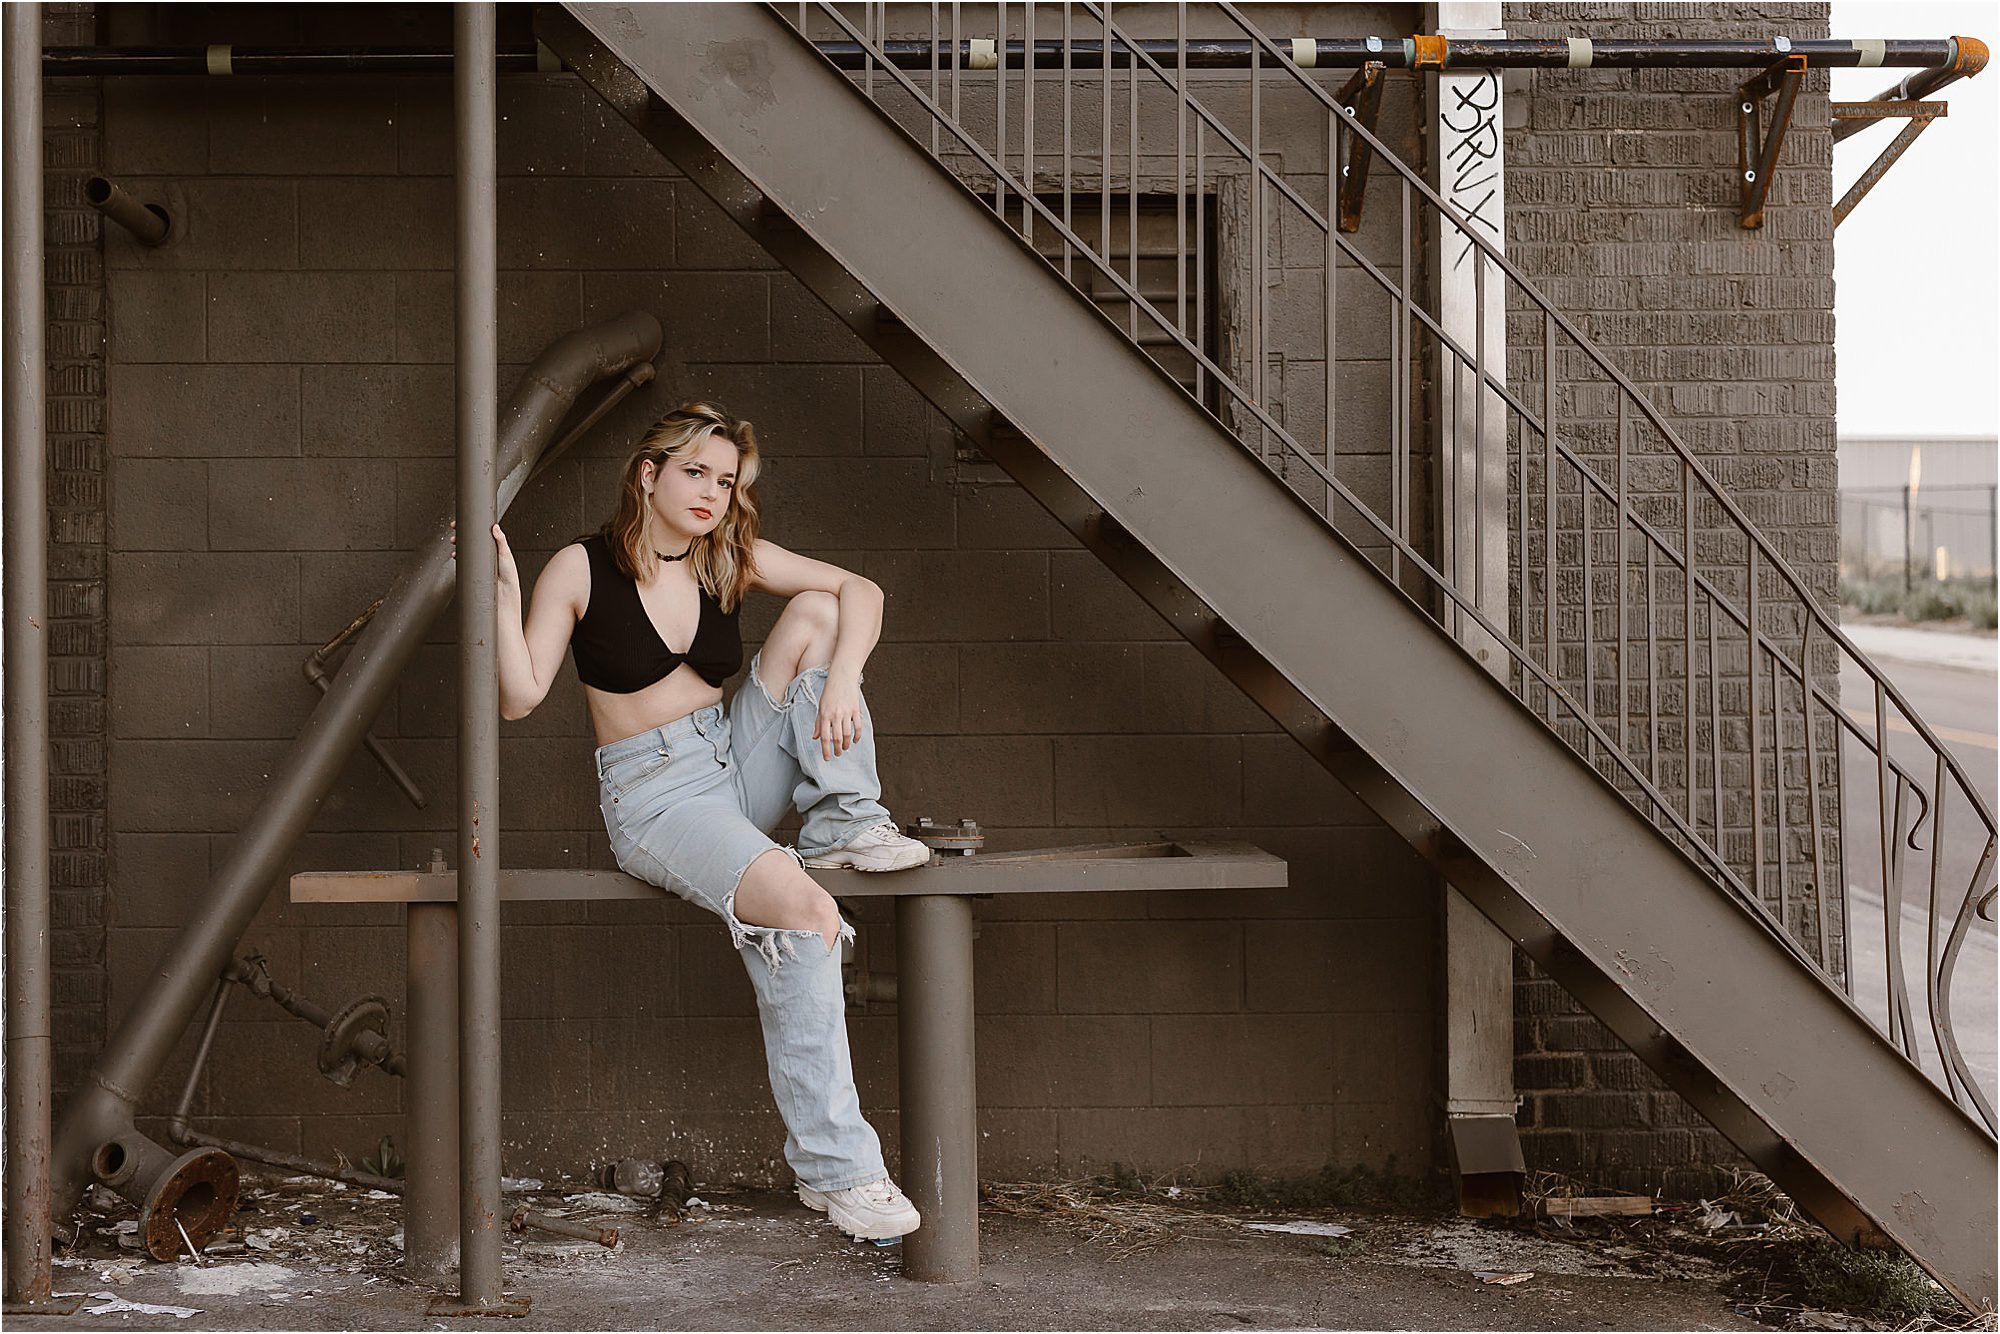 grunge senior photos with girl sitting under stairs in black top and light cut jeans